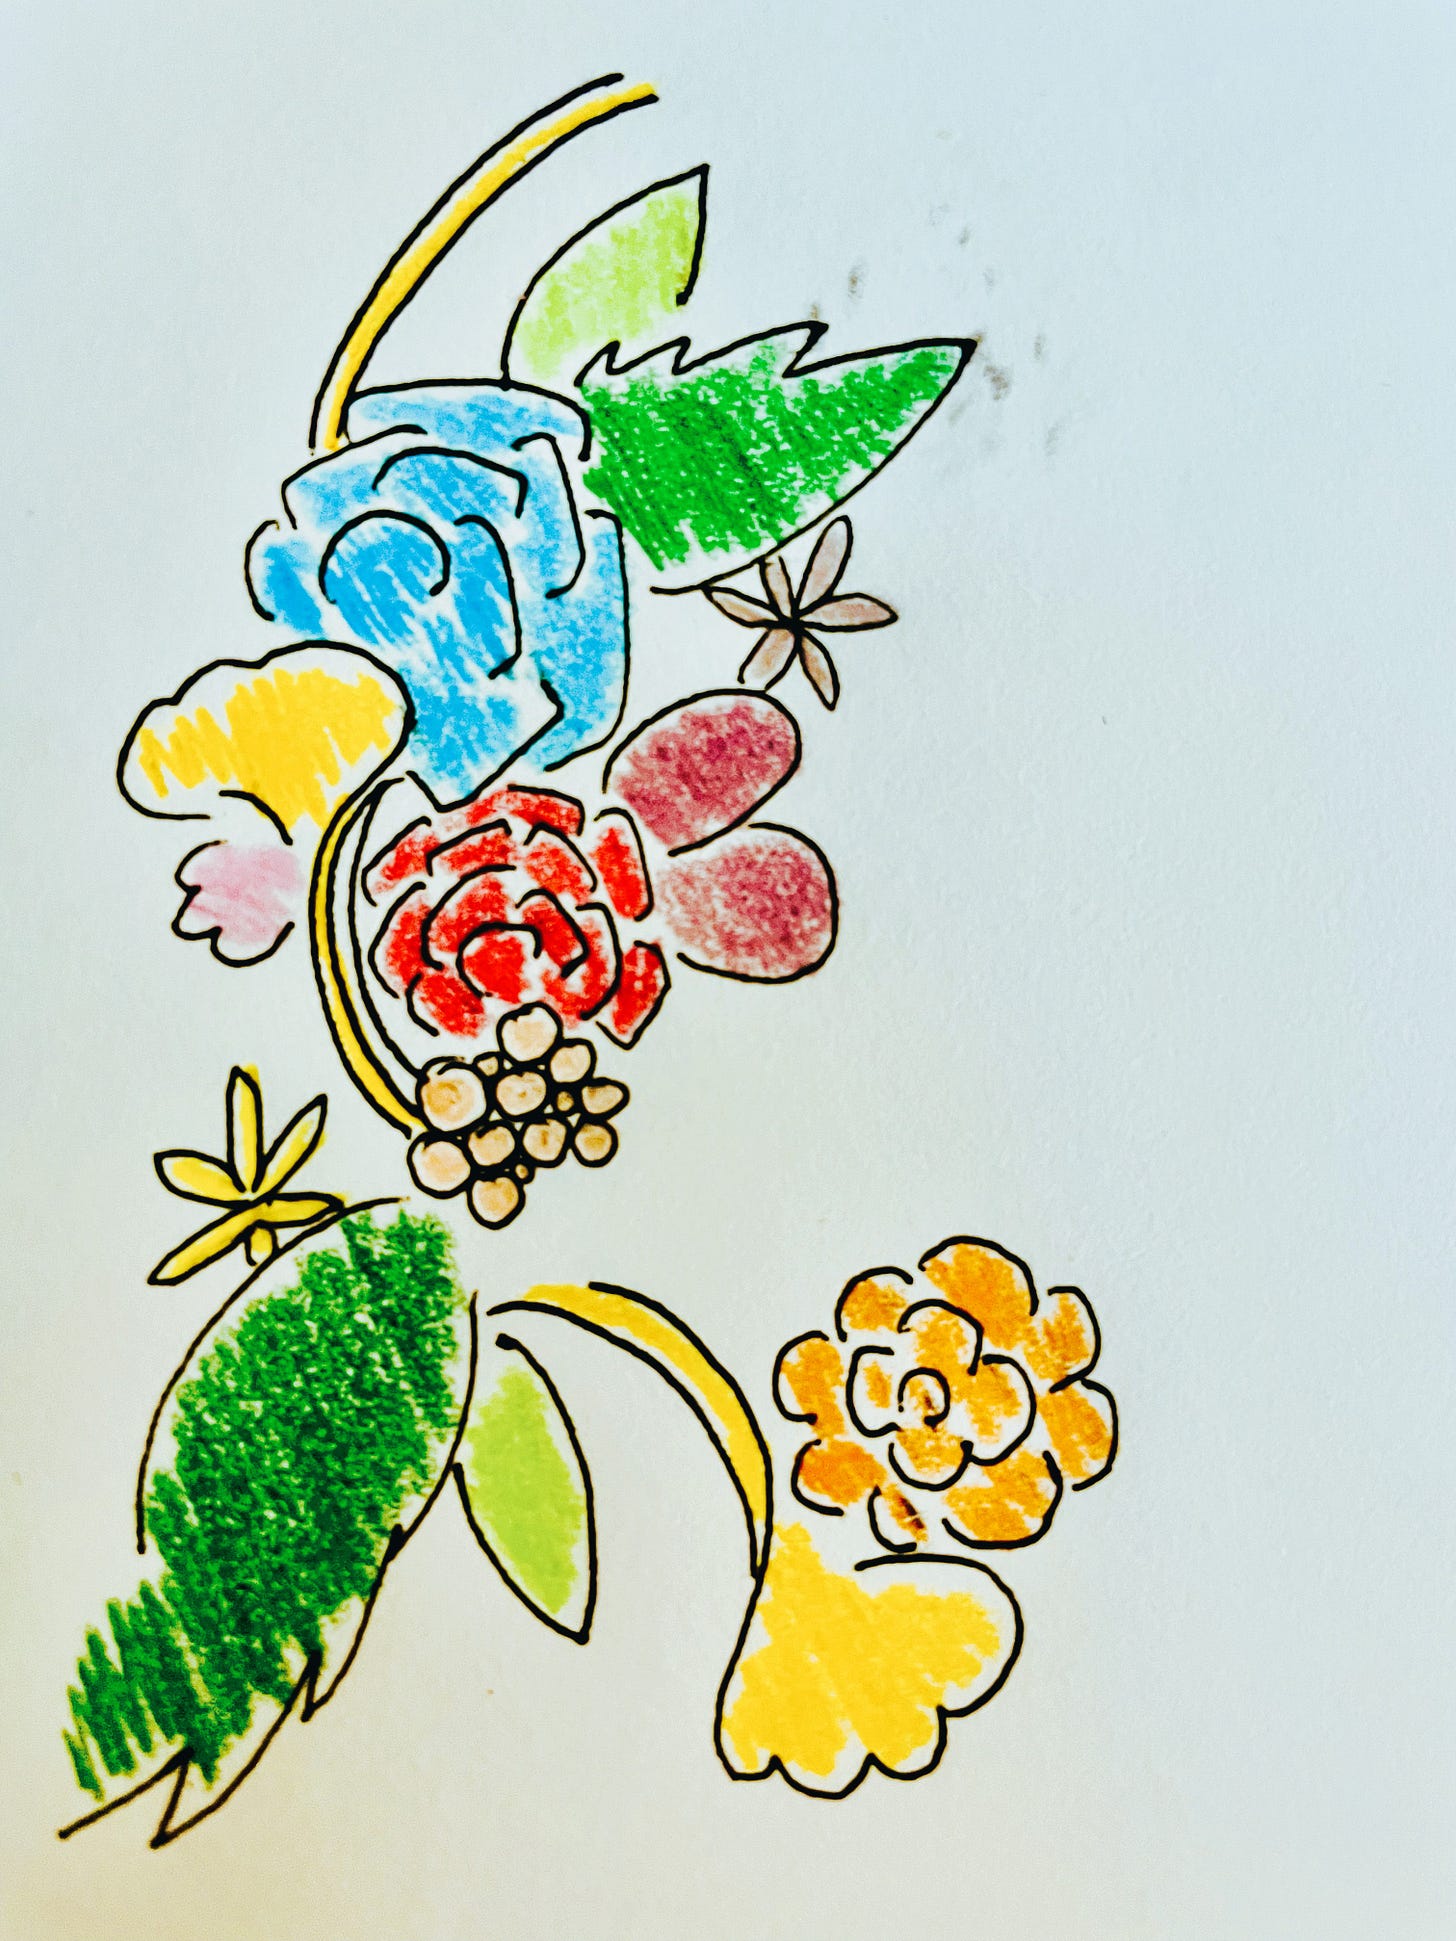 Colorful doodles with black ink borders